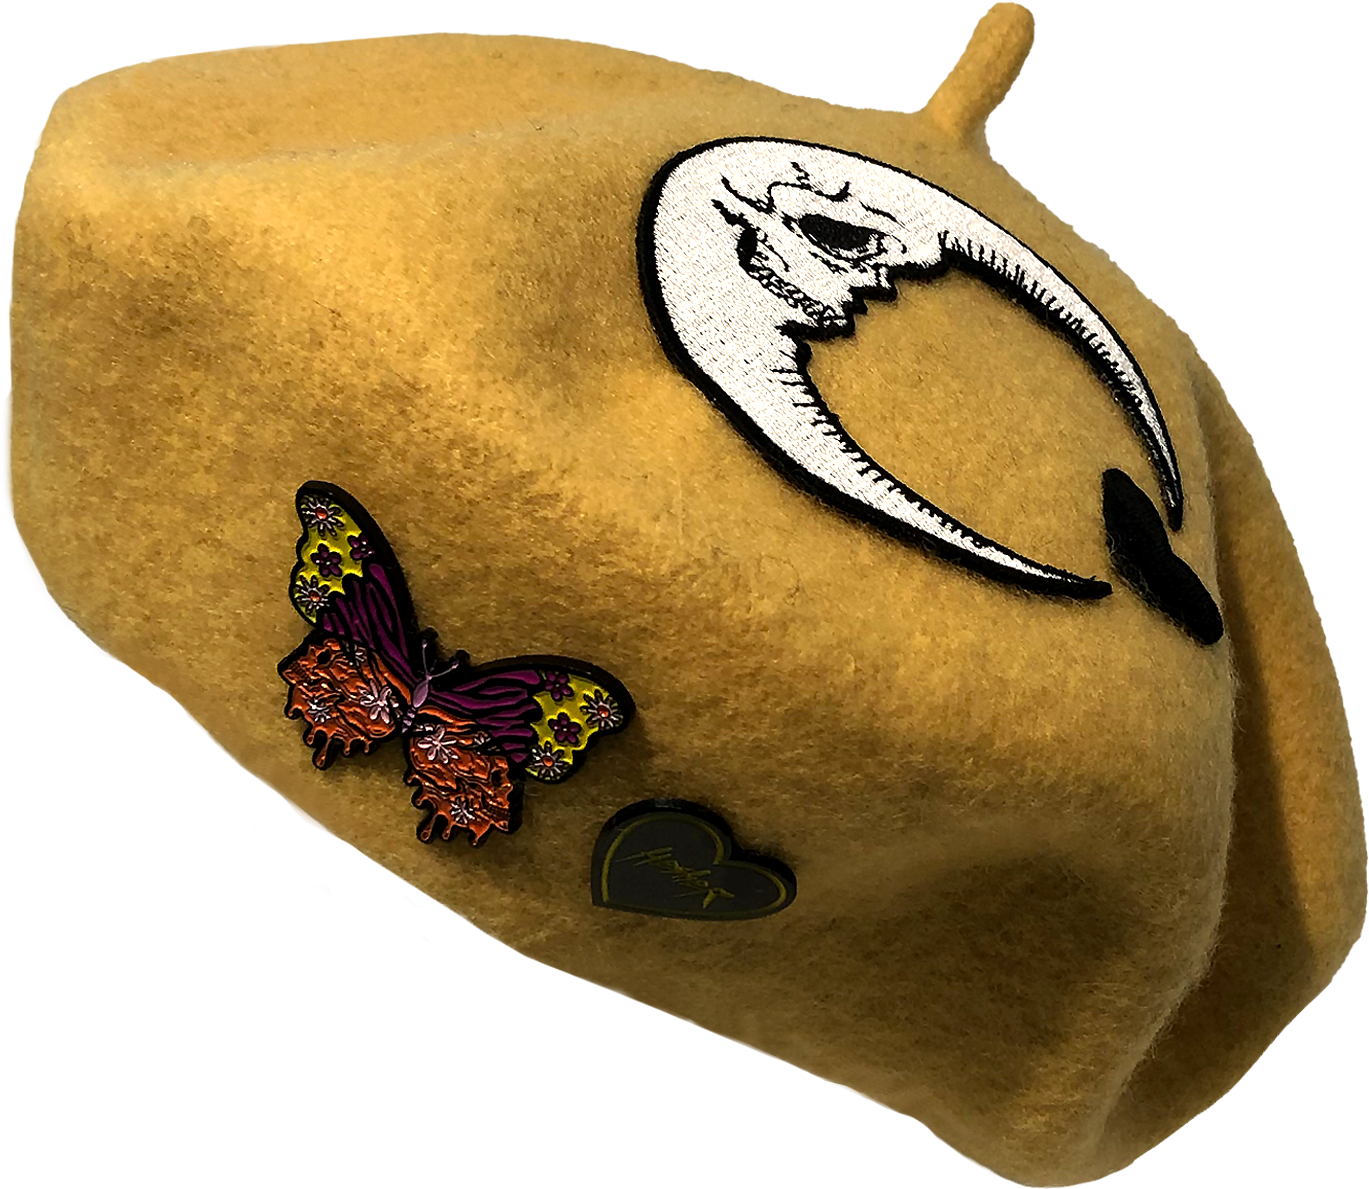 yellow wool beret with skull moon heart patch and colorful butterfly metal pin and black and yellow Hesher heart shaped metal pin